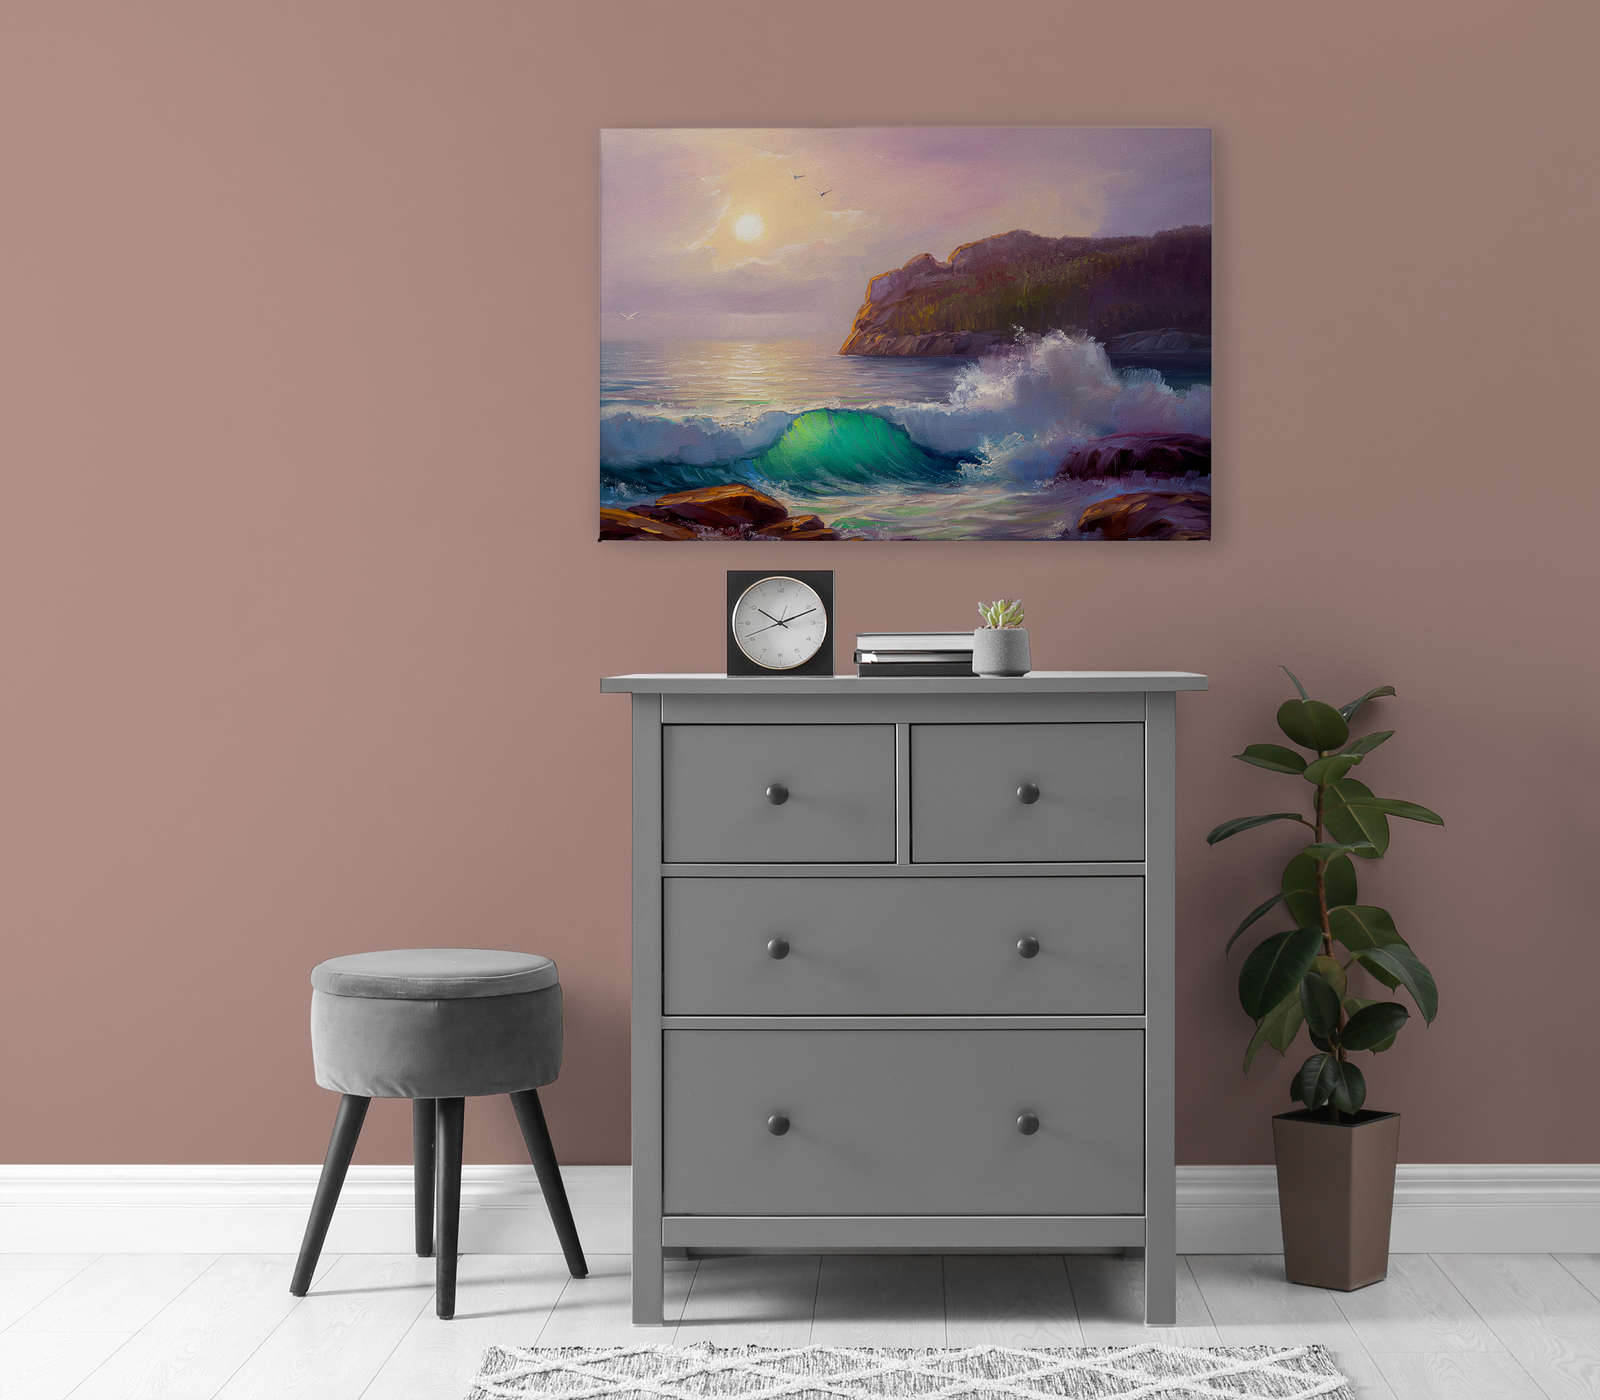             Canvas painting Painting of a Coast at Sunrise - 0.90 m x 0.60 m
        